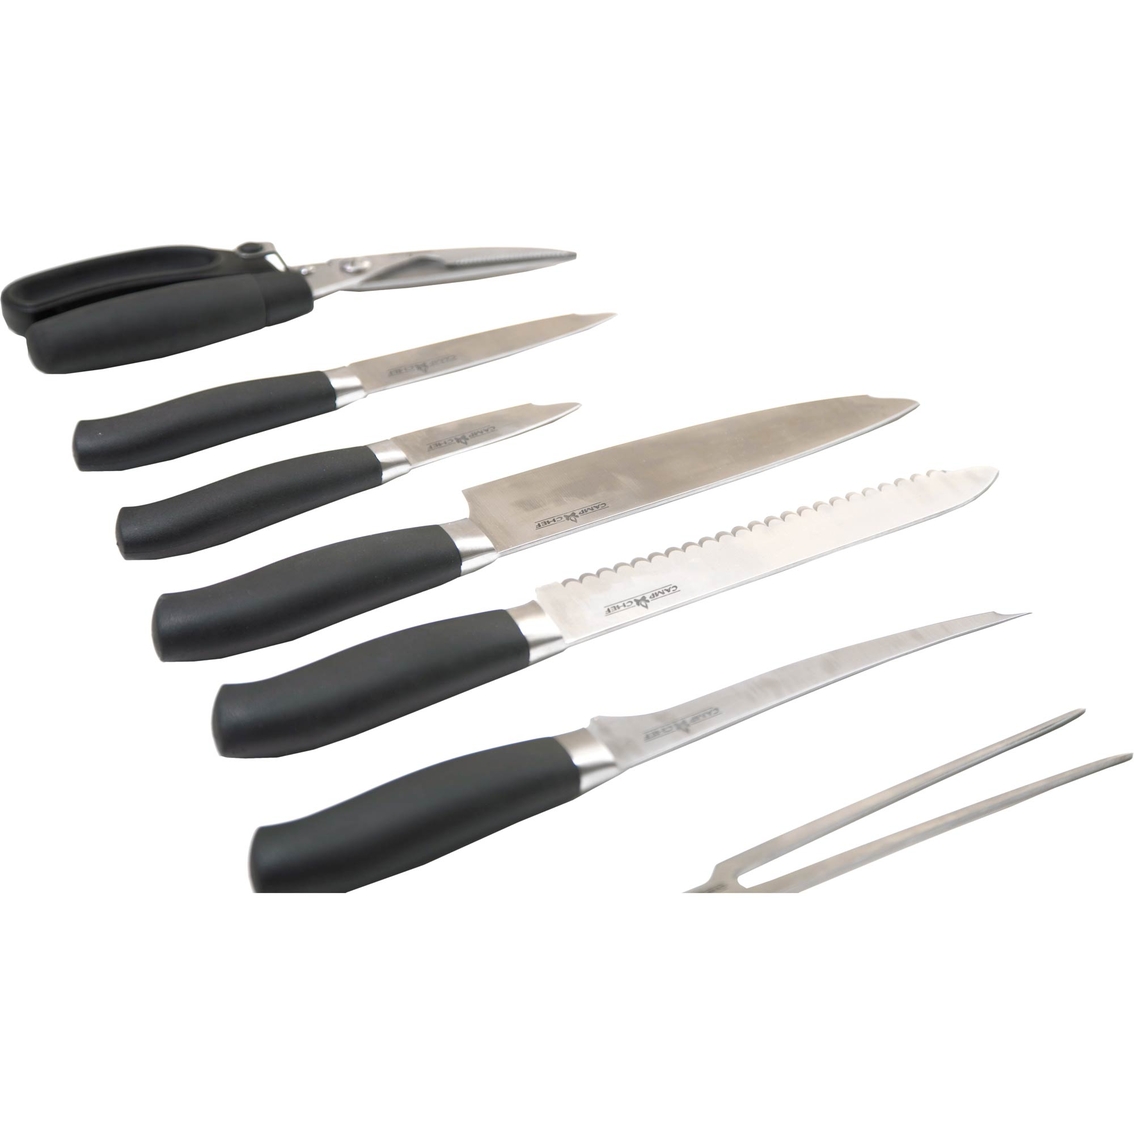 Camp Chef 9 Piece Professional Knife Set - Image 2 of 4